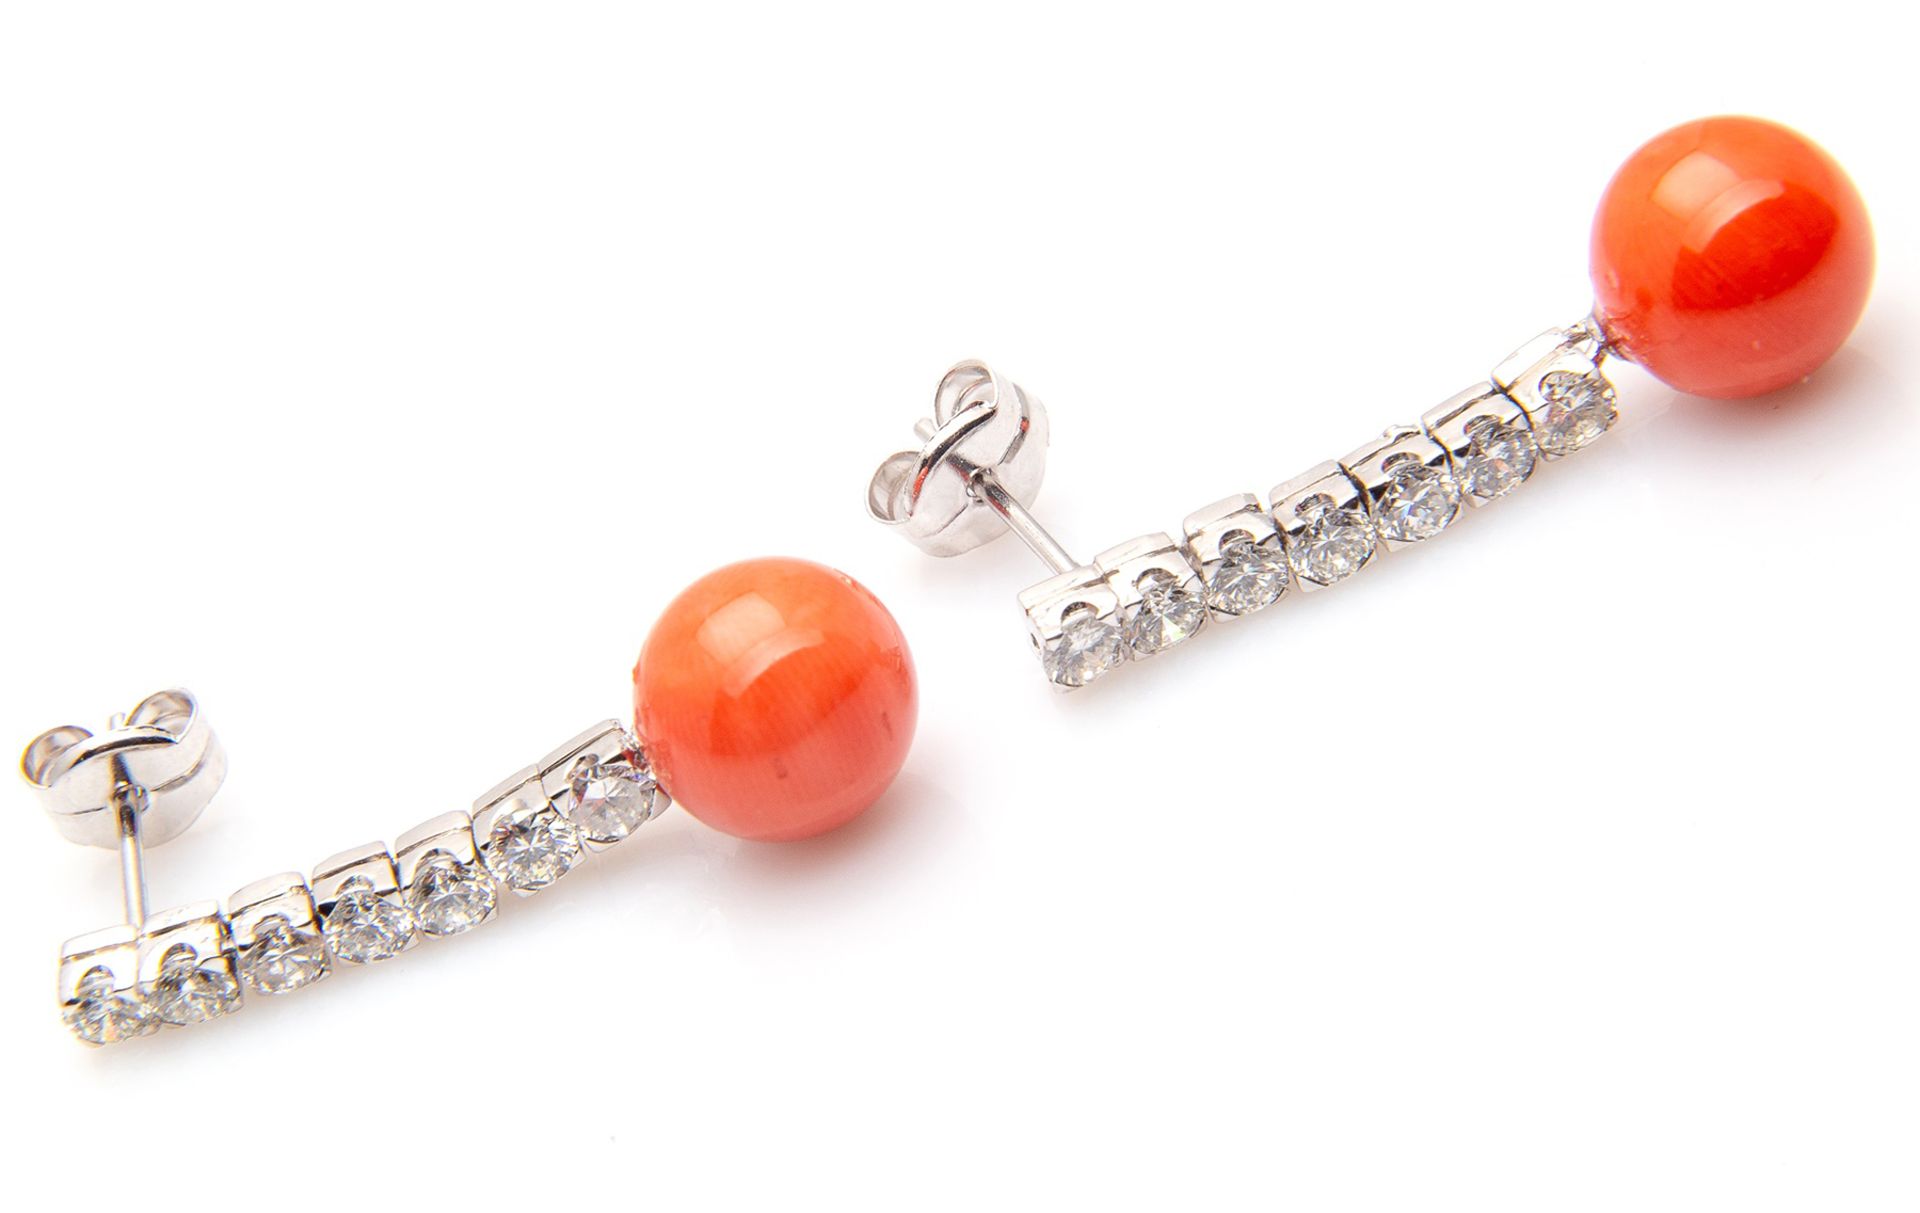 Teardrop earrings in 18k white gold, brilliant cut diamonds and AAA quality Mediterranean red coral - Image 9 of 9